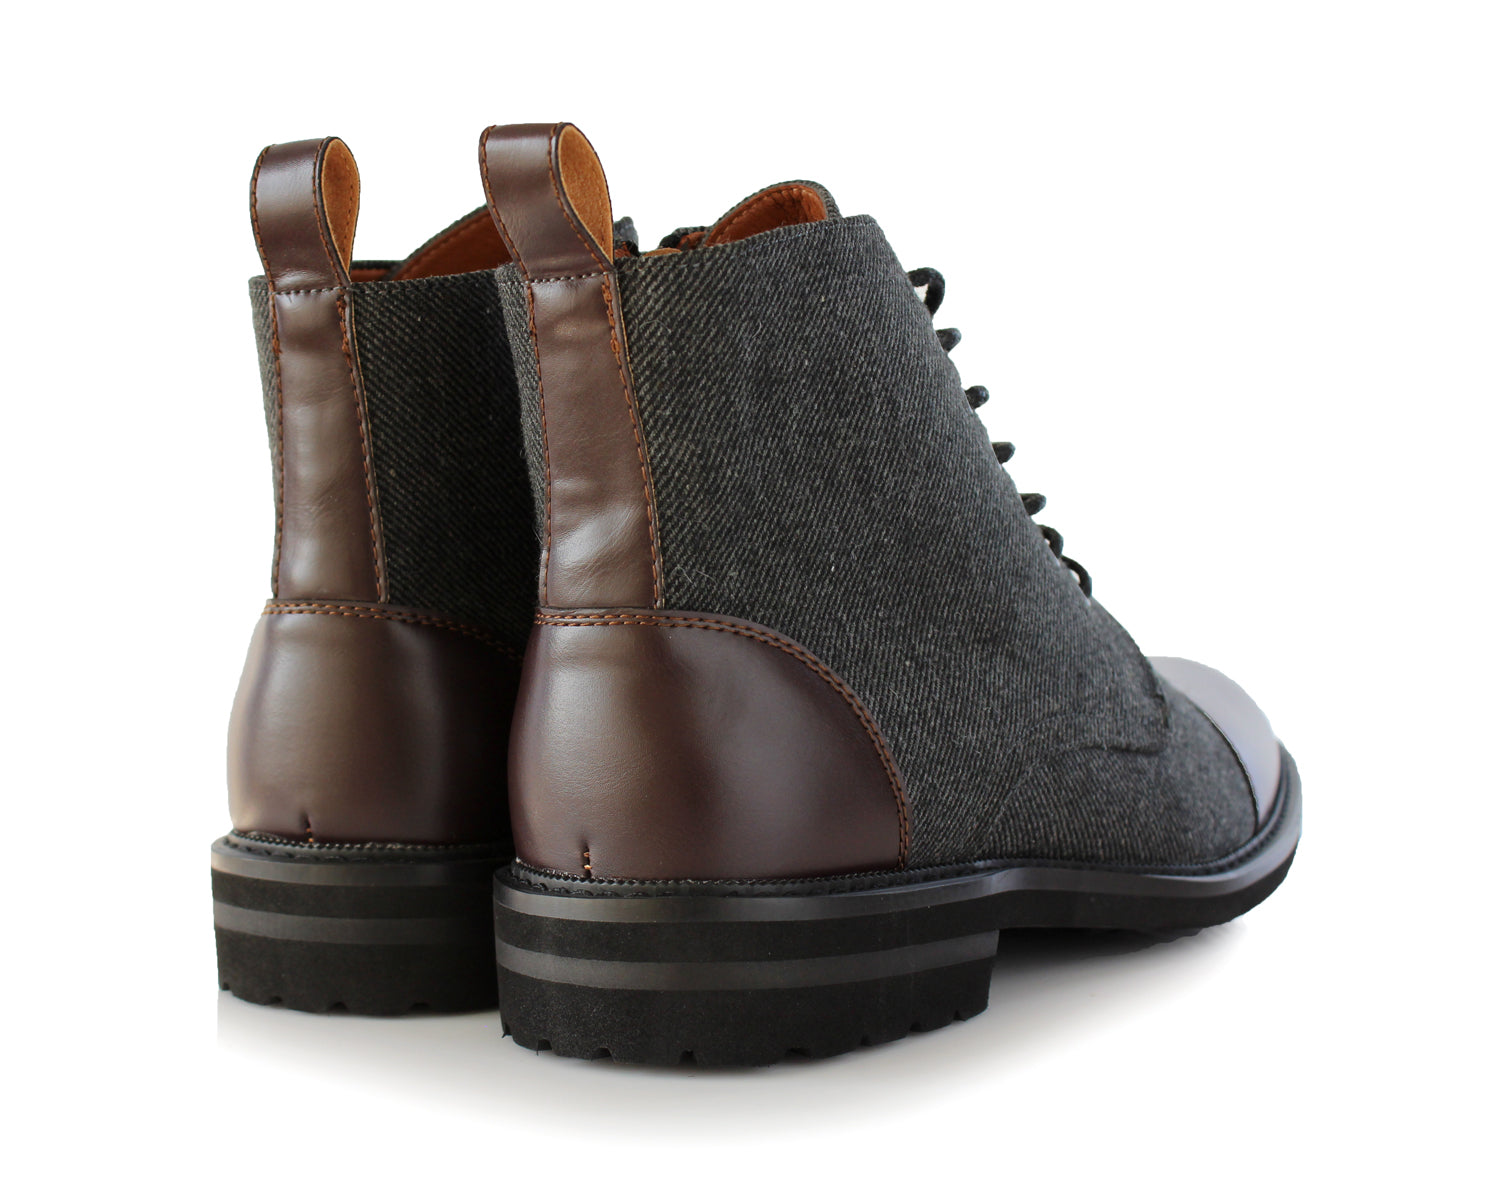 Duo-textured Woolen Derby Boots | Brooke by Polar Fox | Conal Footwear | Paired Back Angle View